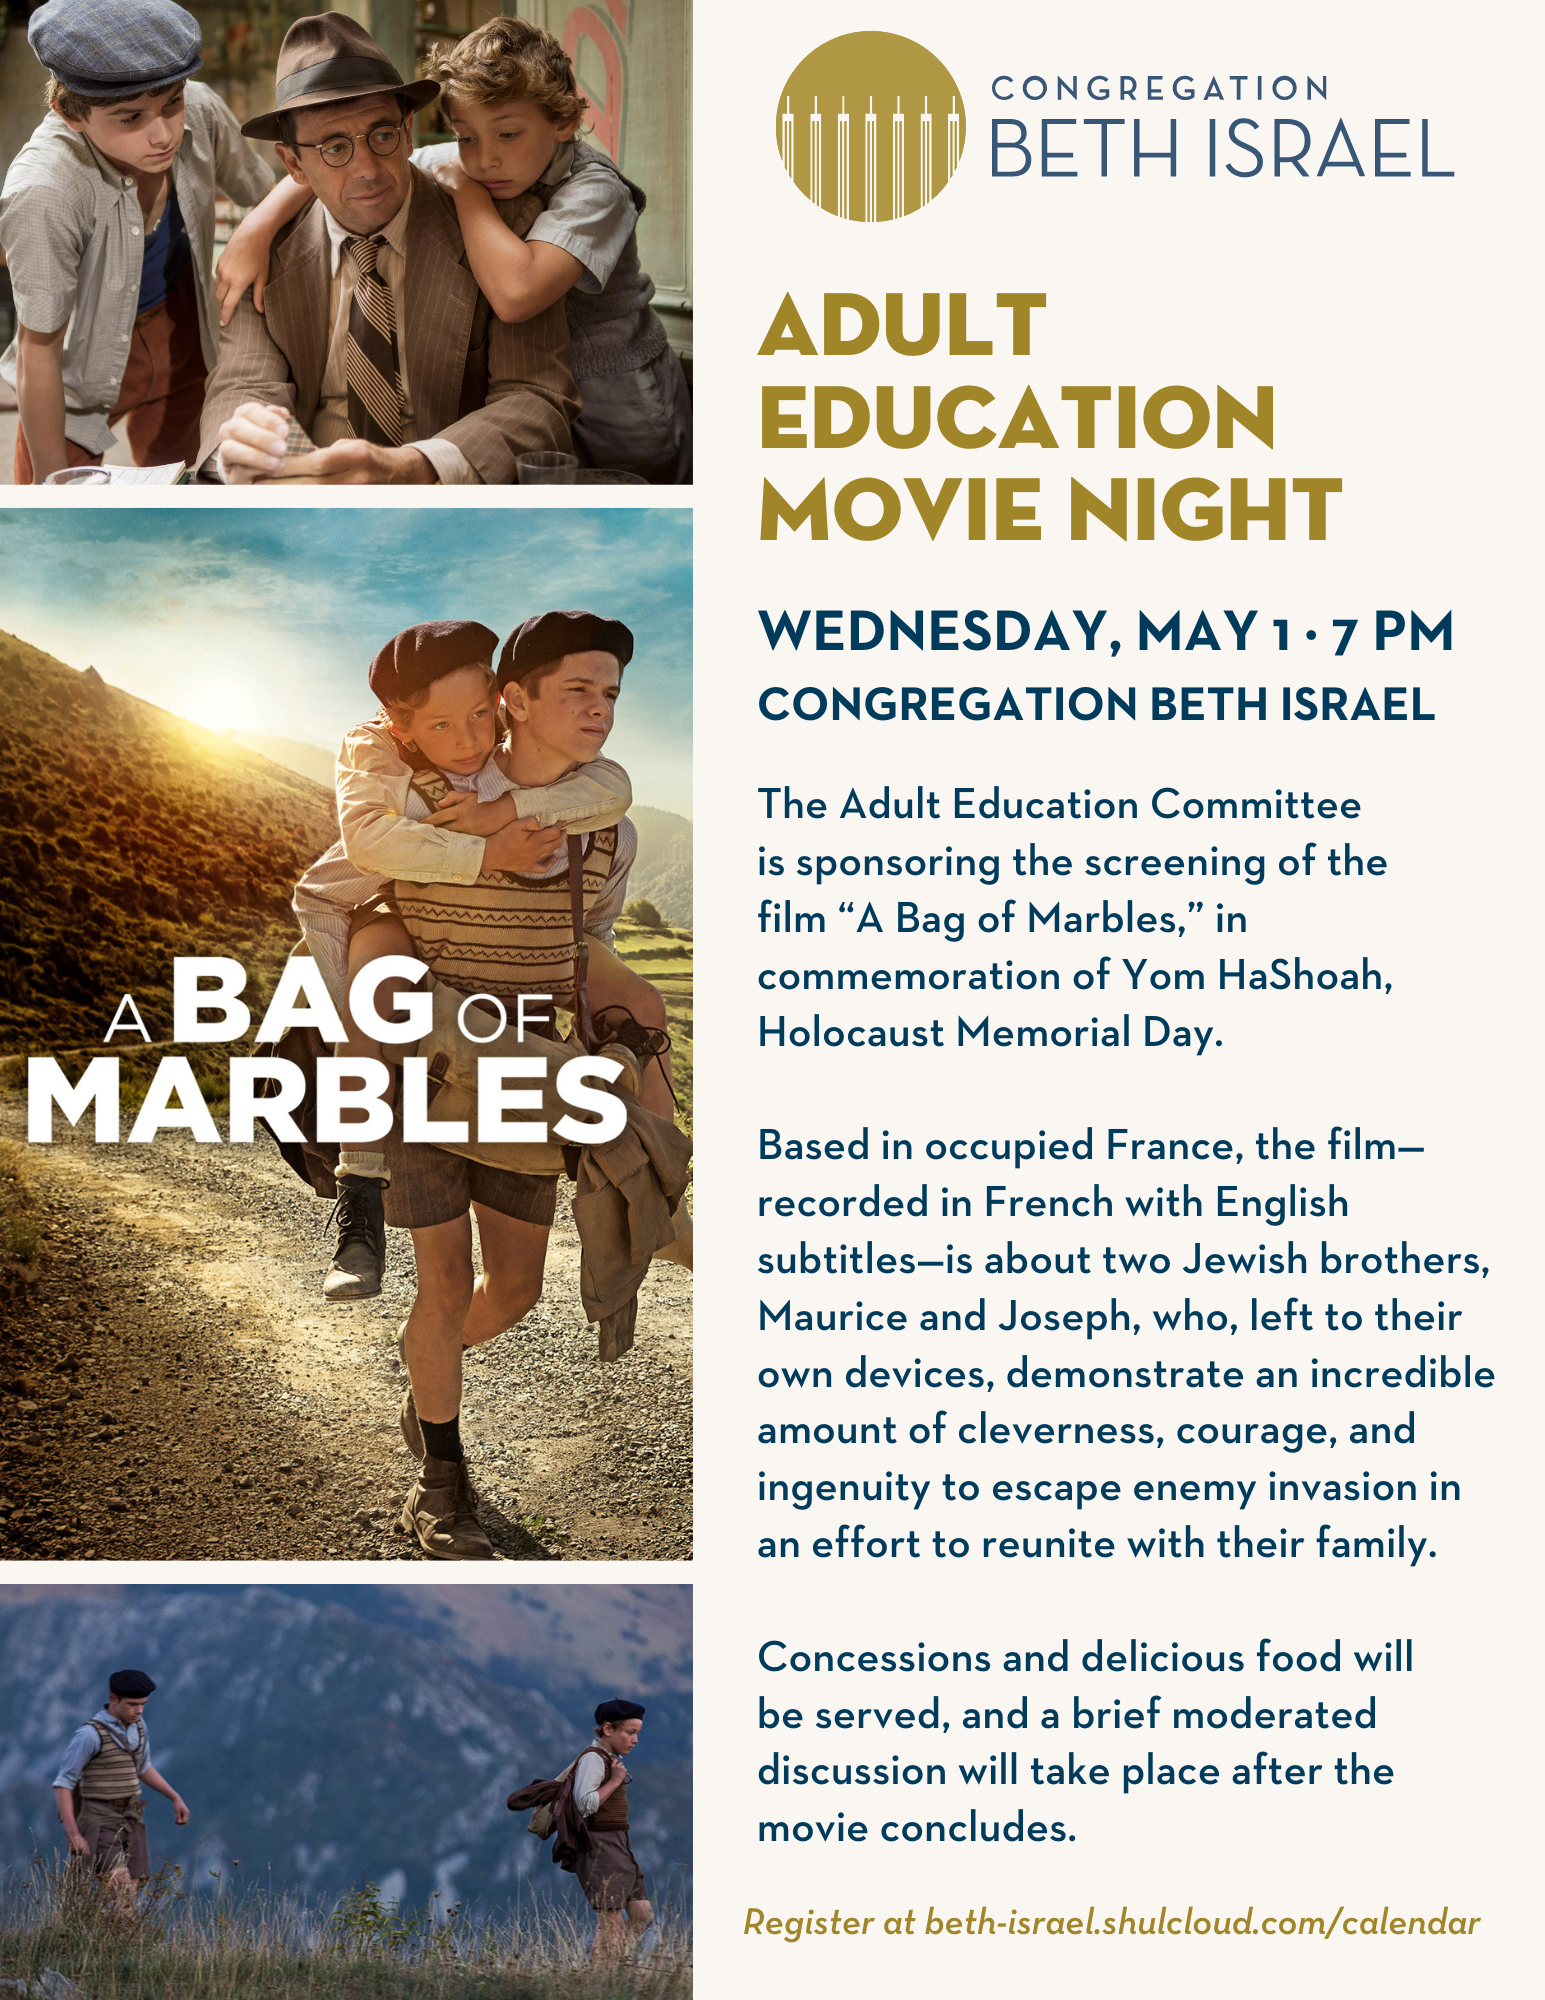 Adult Education Movie Night: A Bag of Marbles